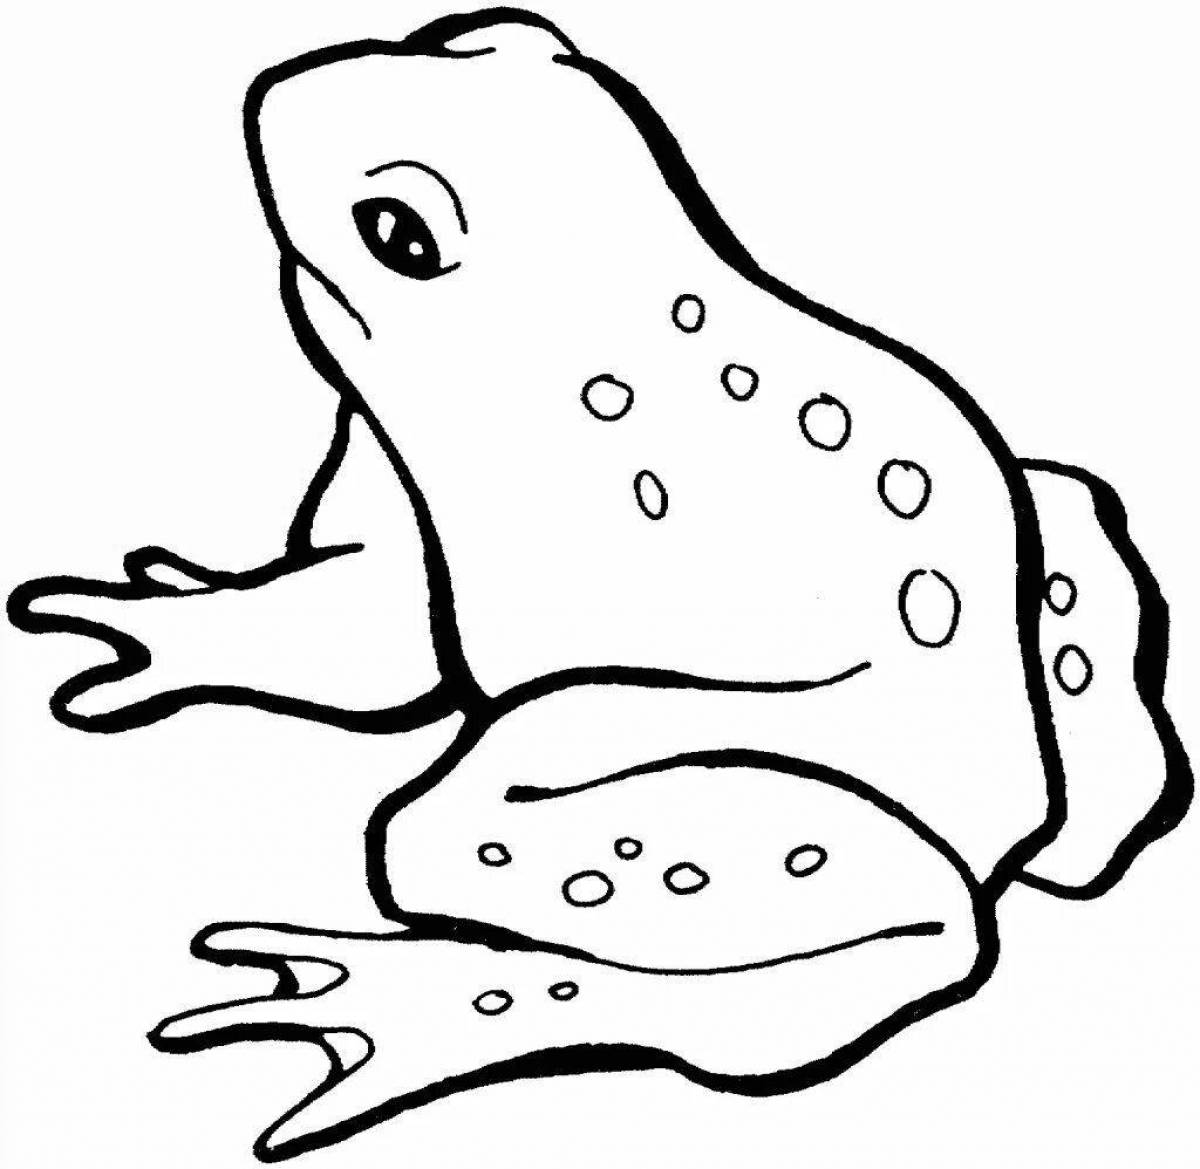 Coloring page nice frog